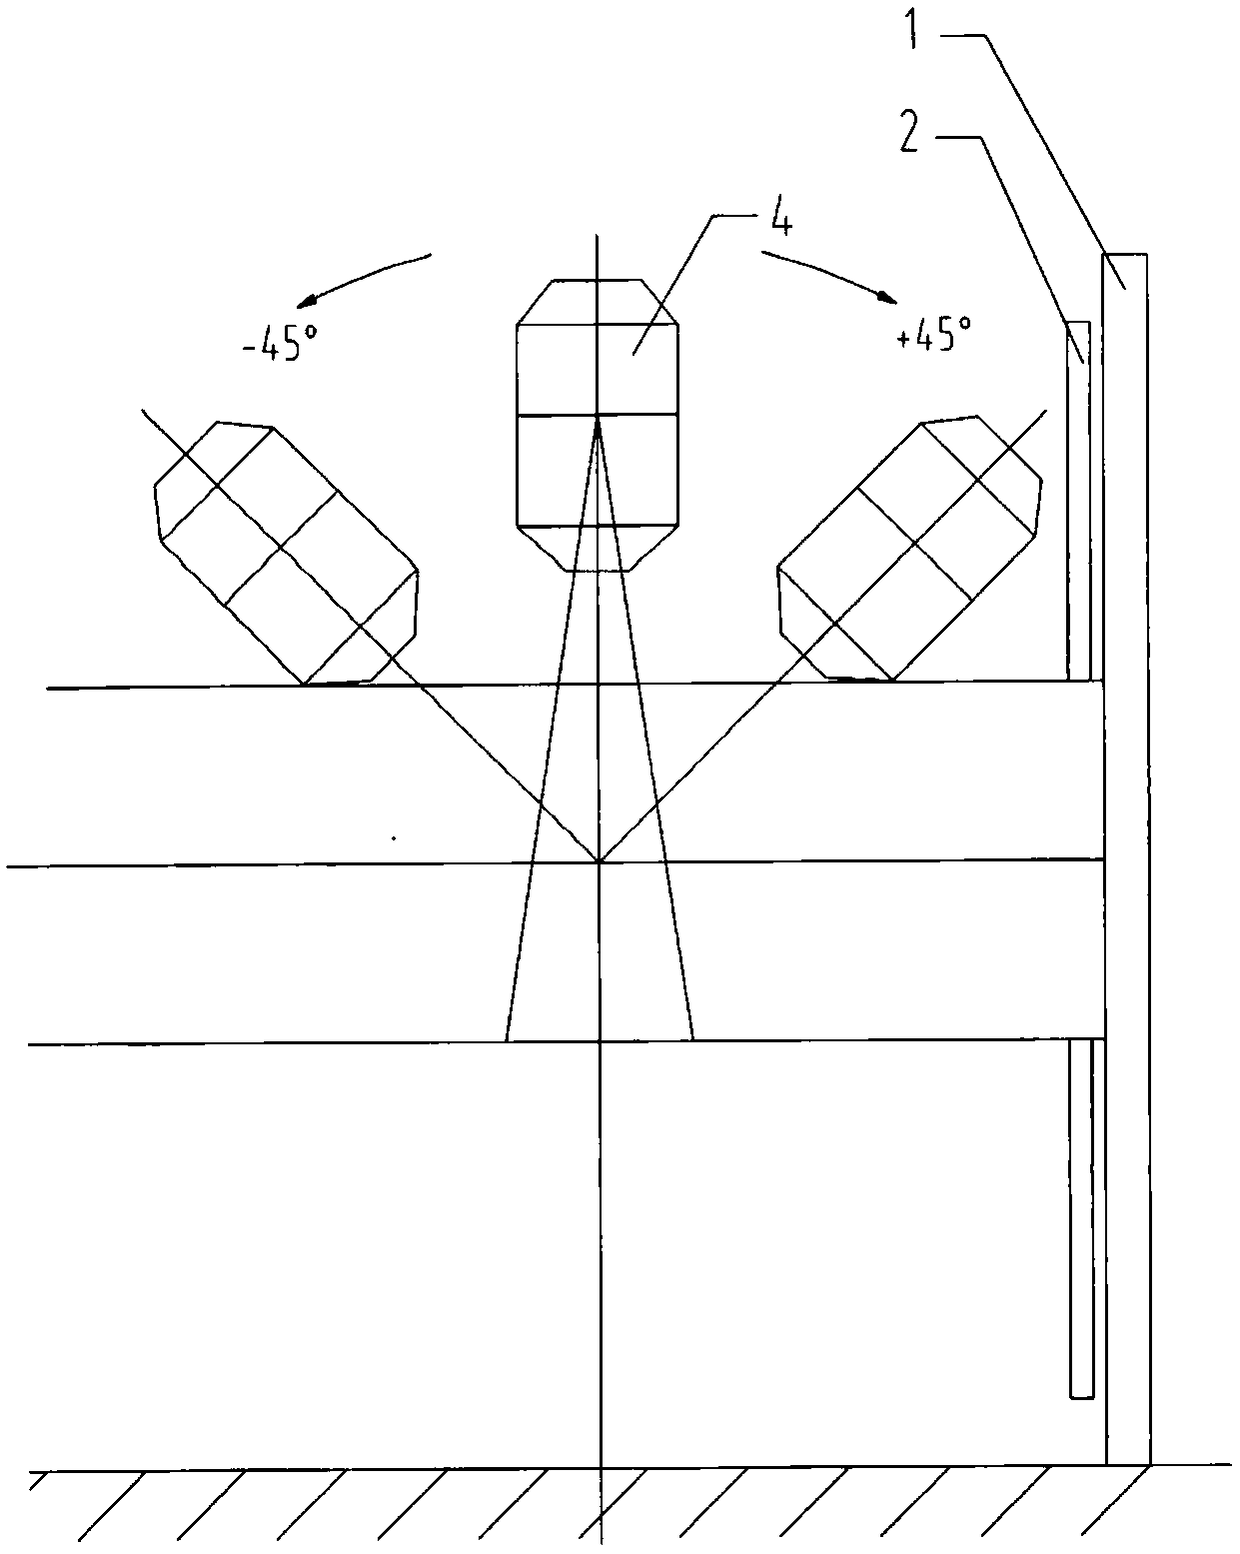 Accelerator non-coplanar radiation therapy device based on compound dual rotating rack